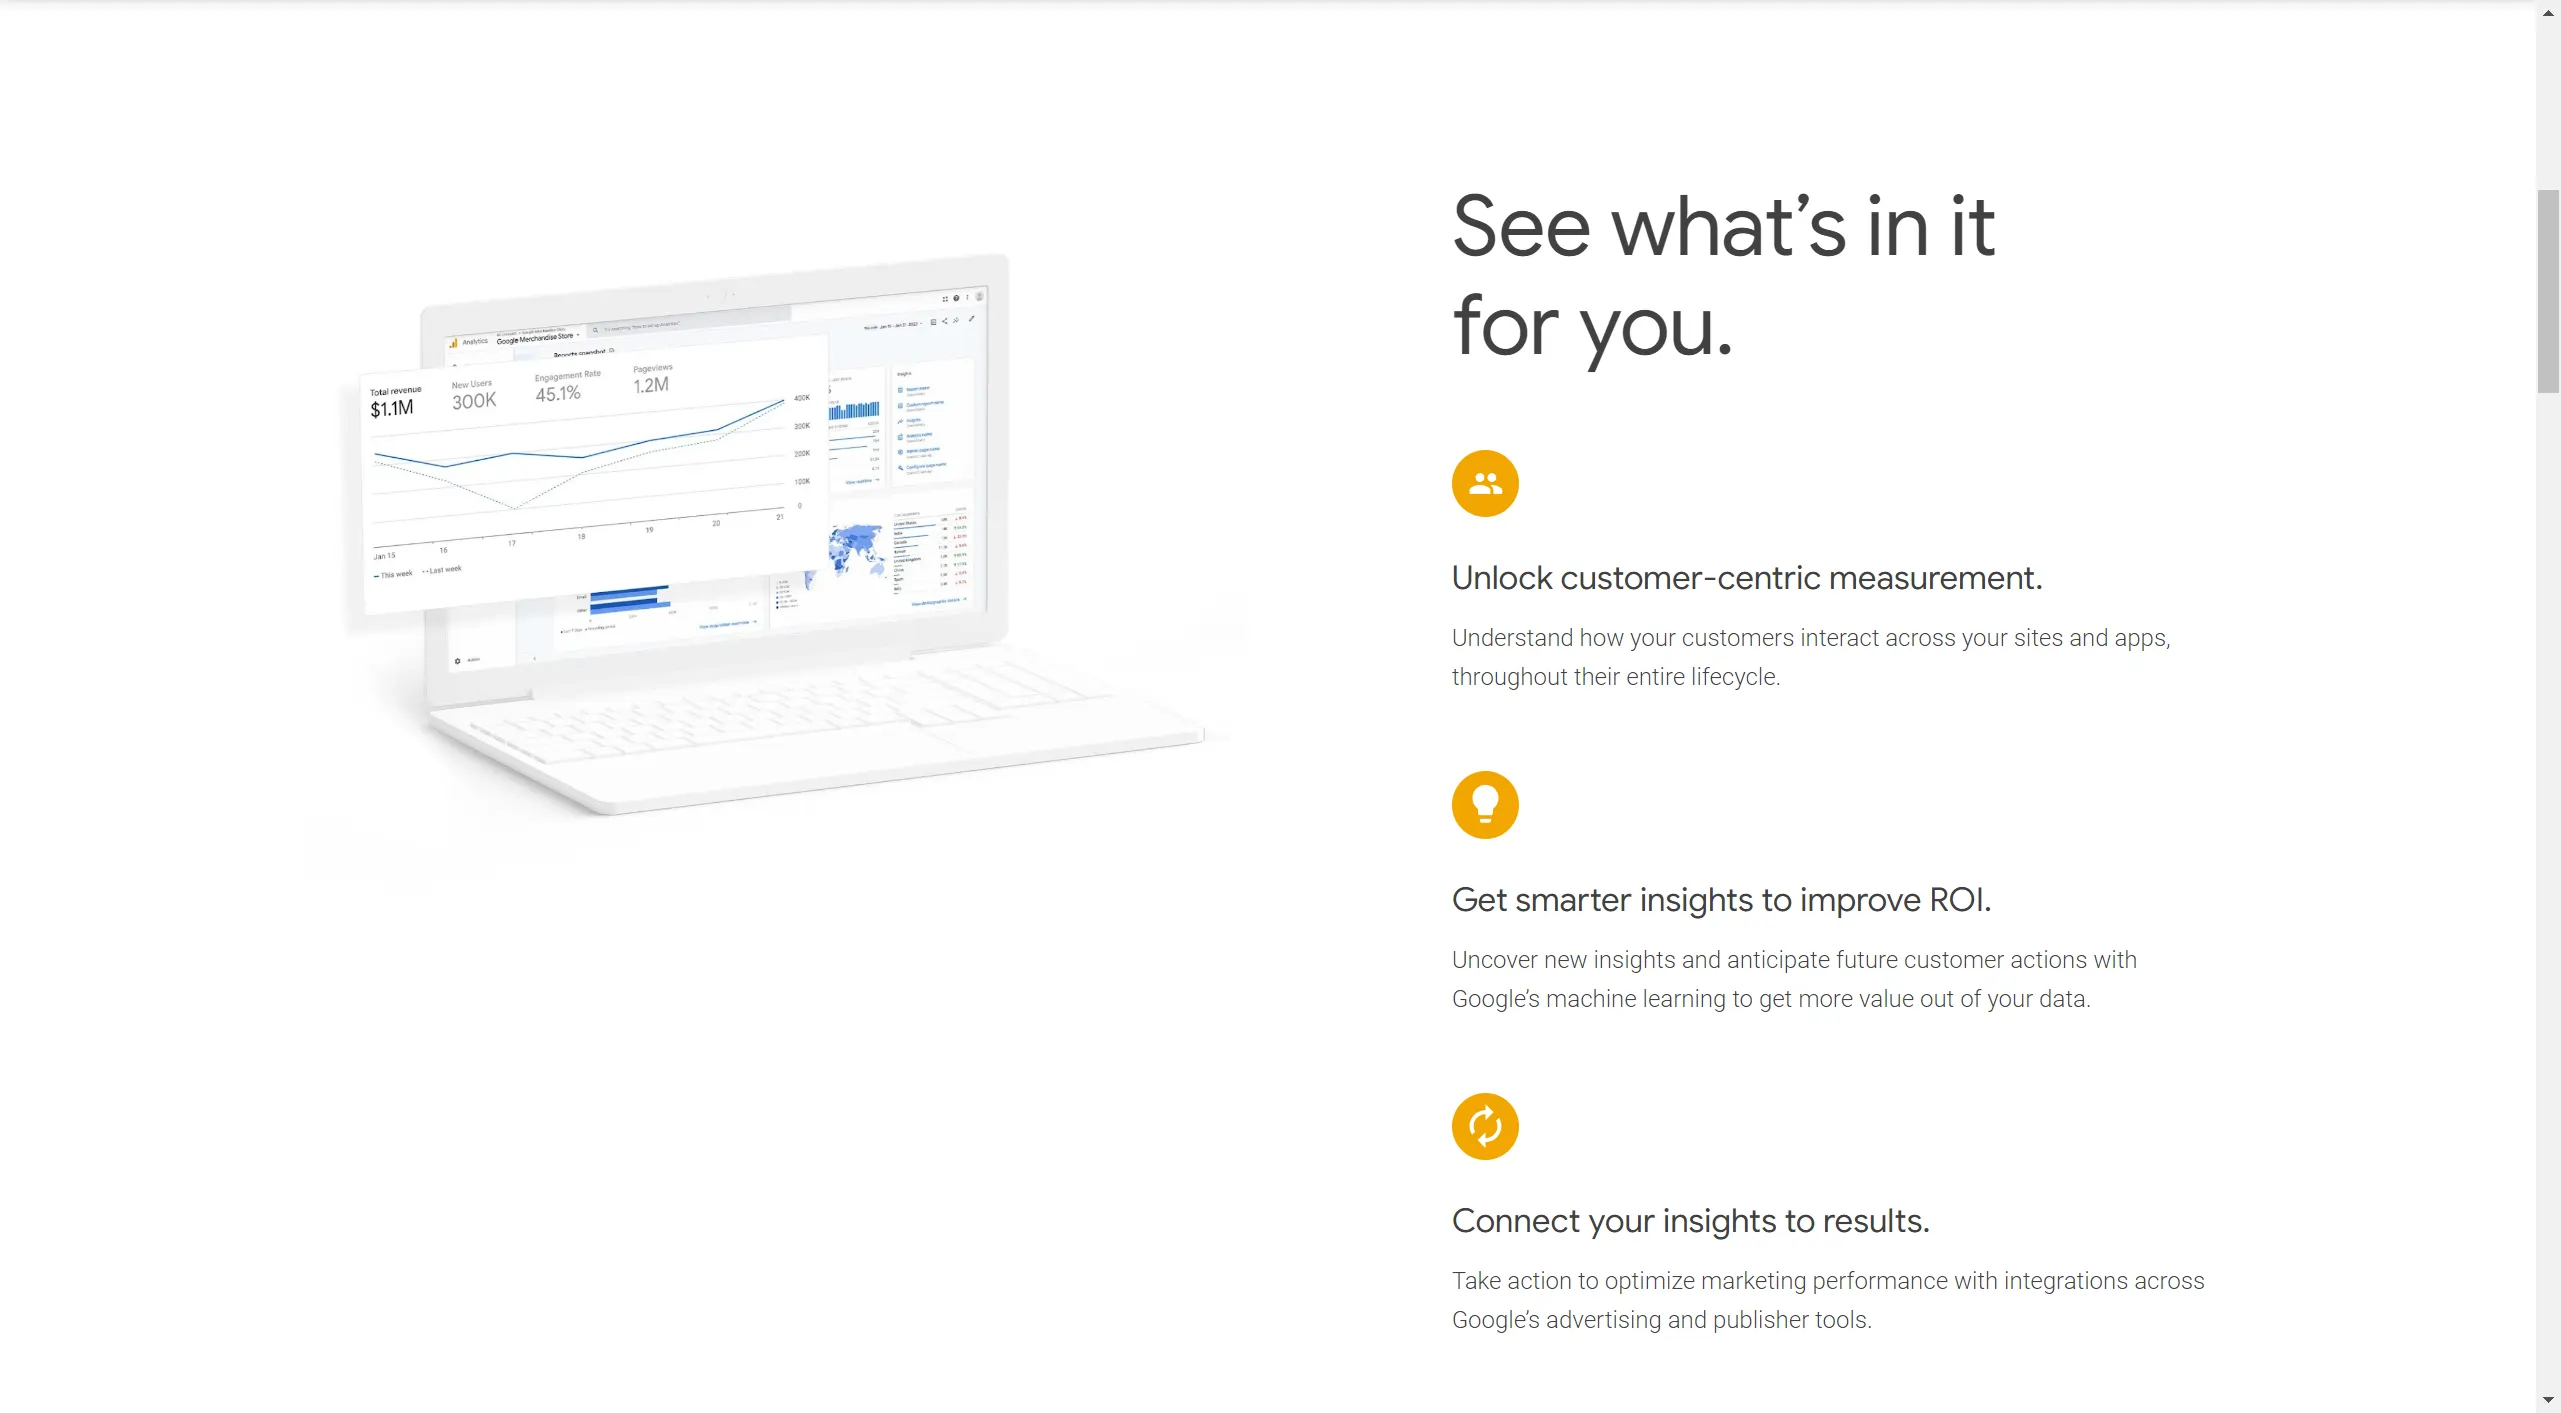 Google Analytics features it offers such as customer-centric measurements, smarter insights to improve ROI, and connecting your own insights to see results